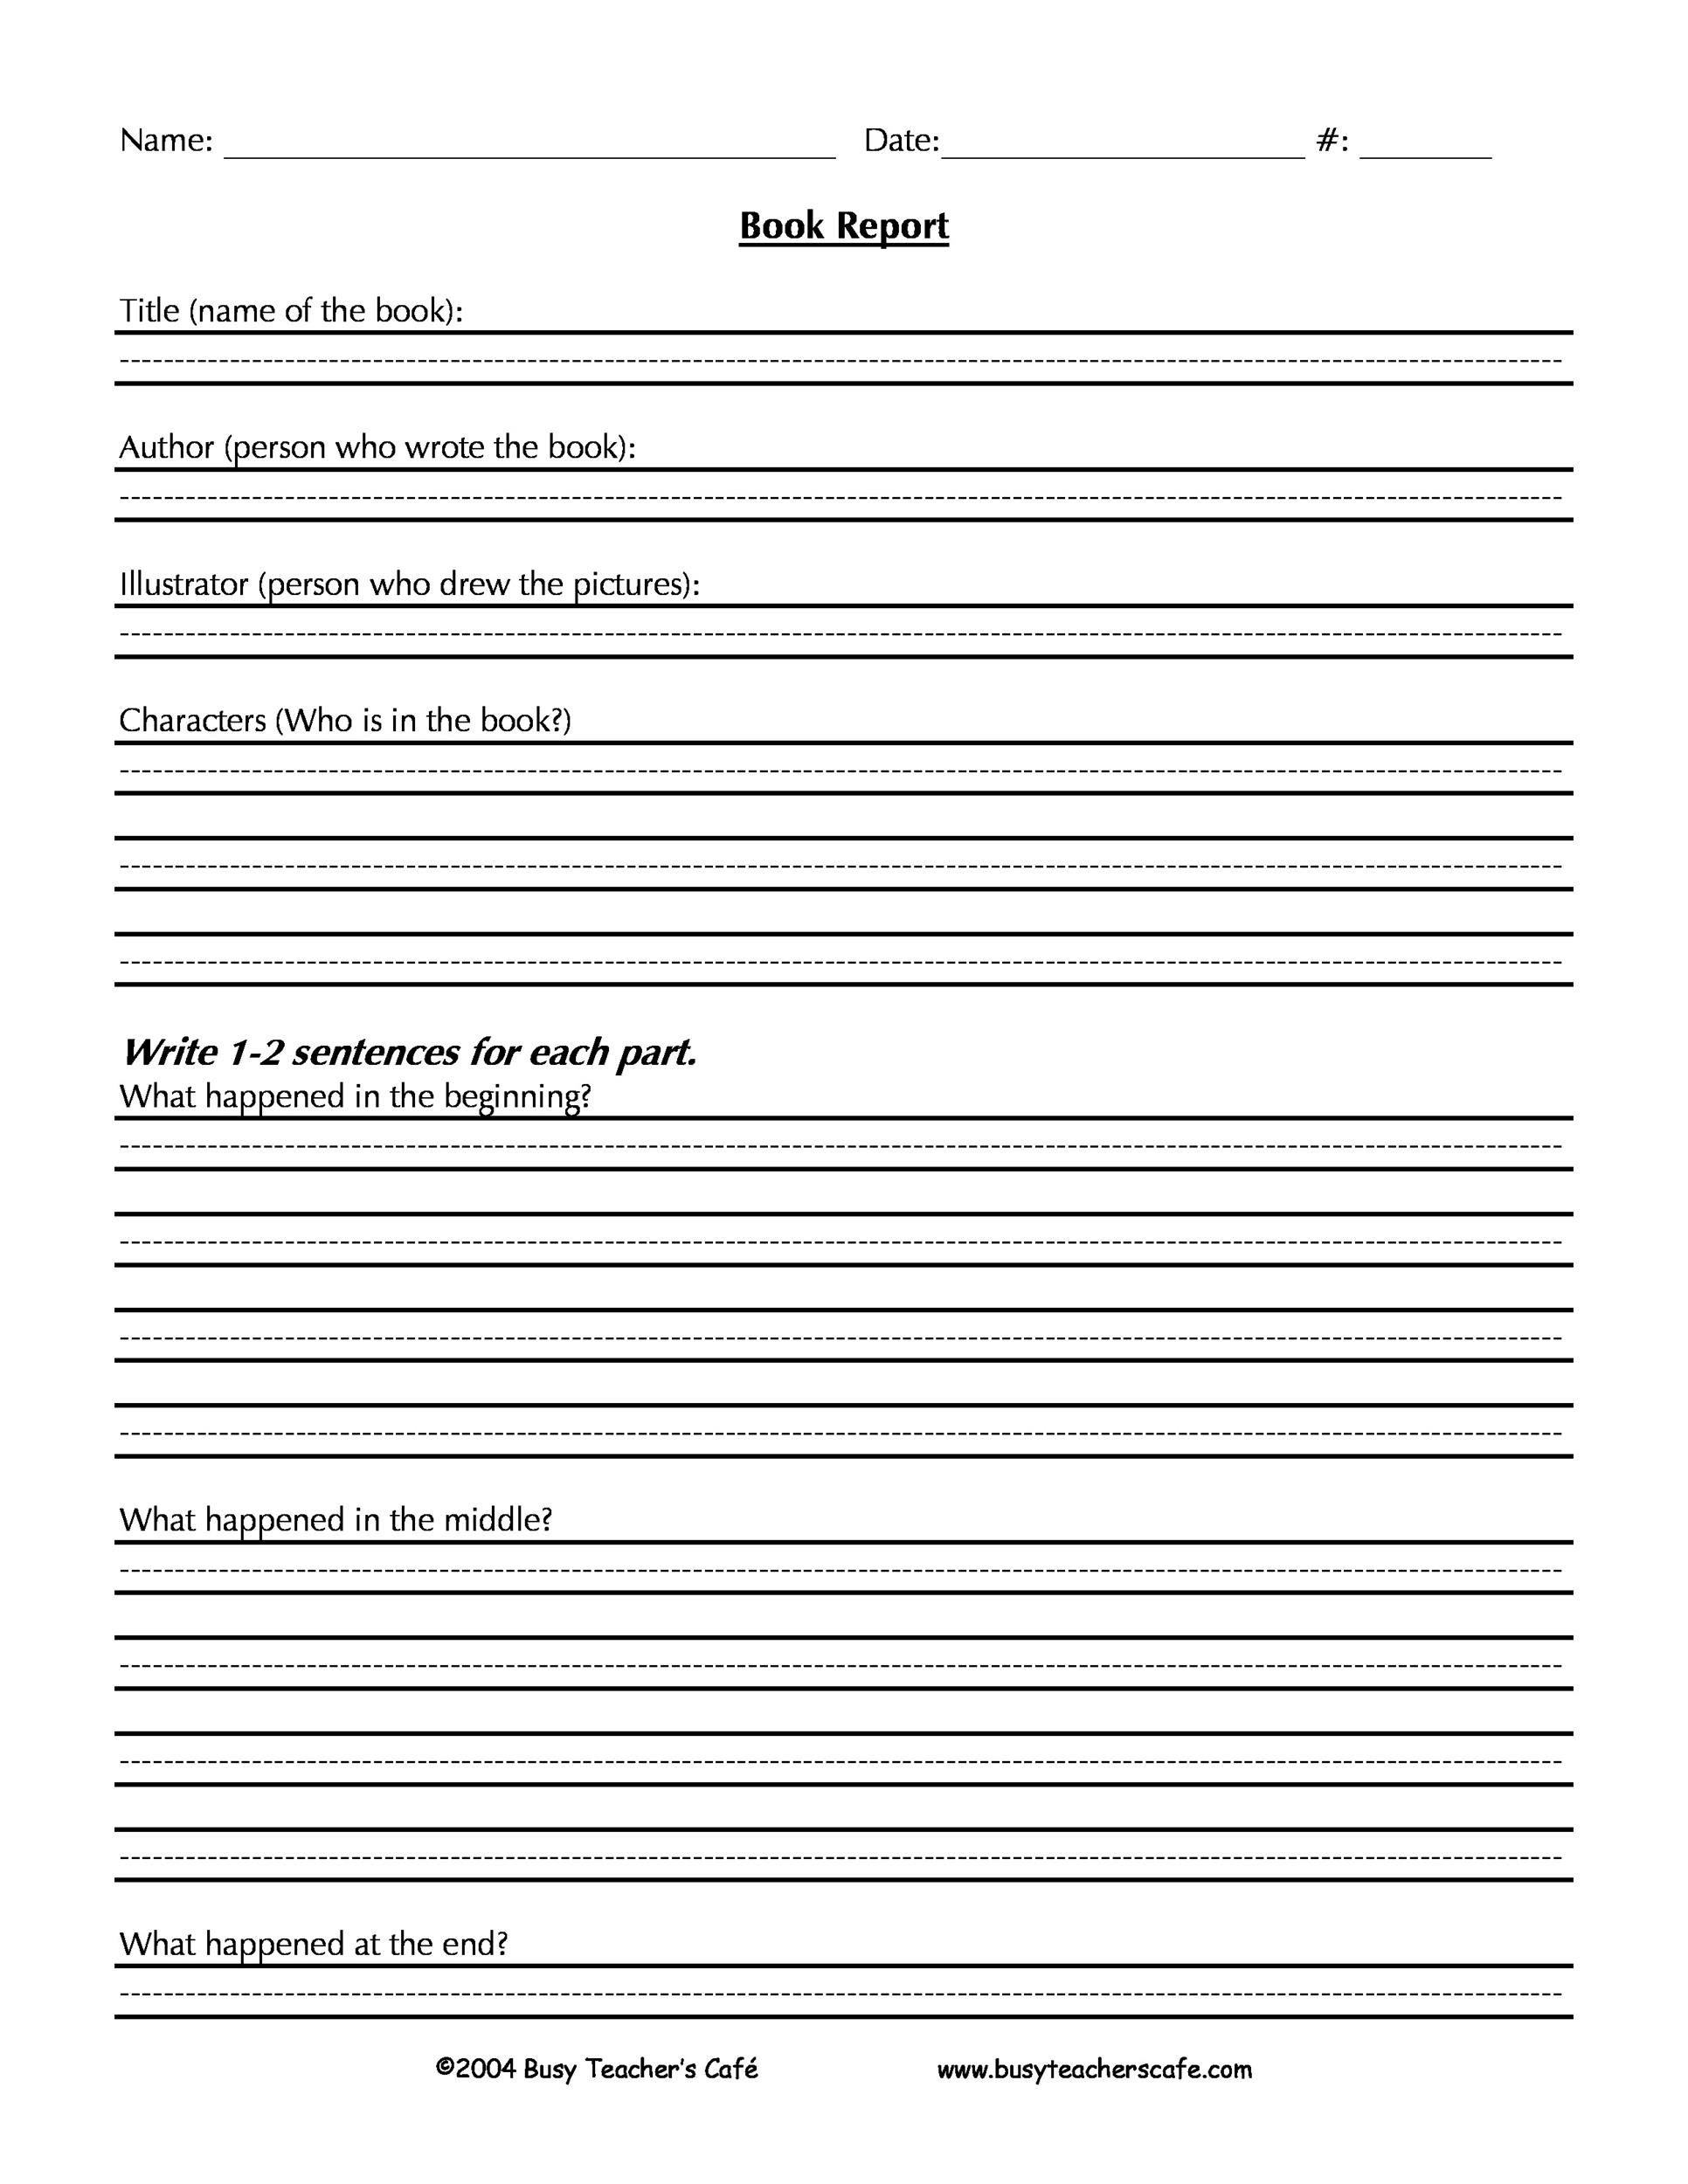 template for book report middle school